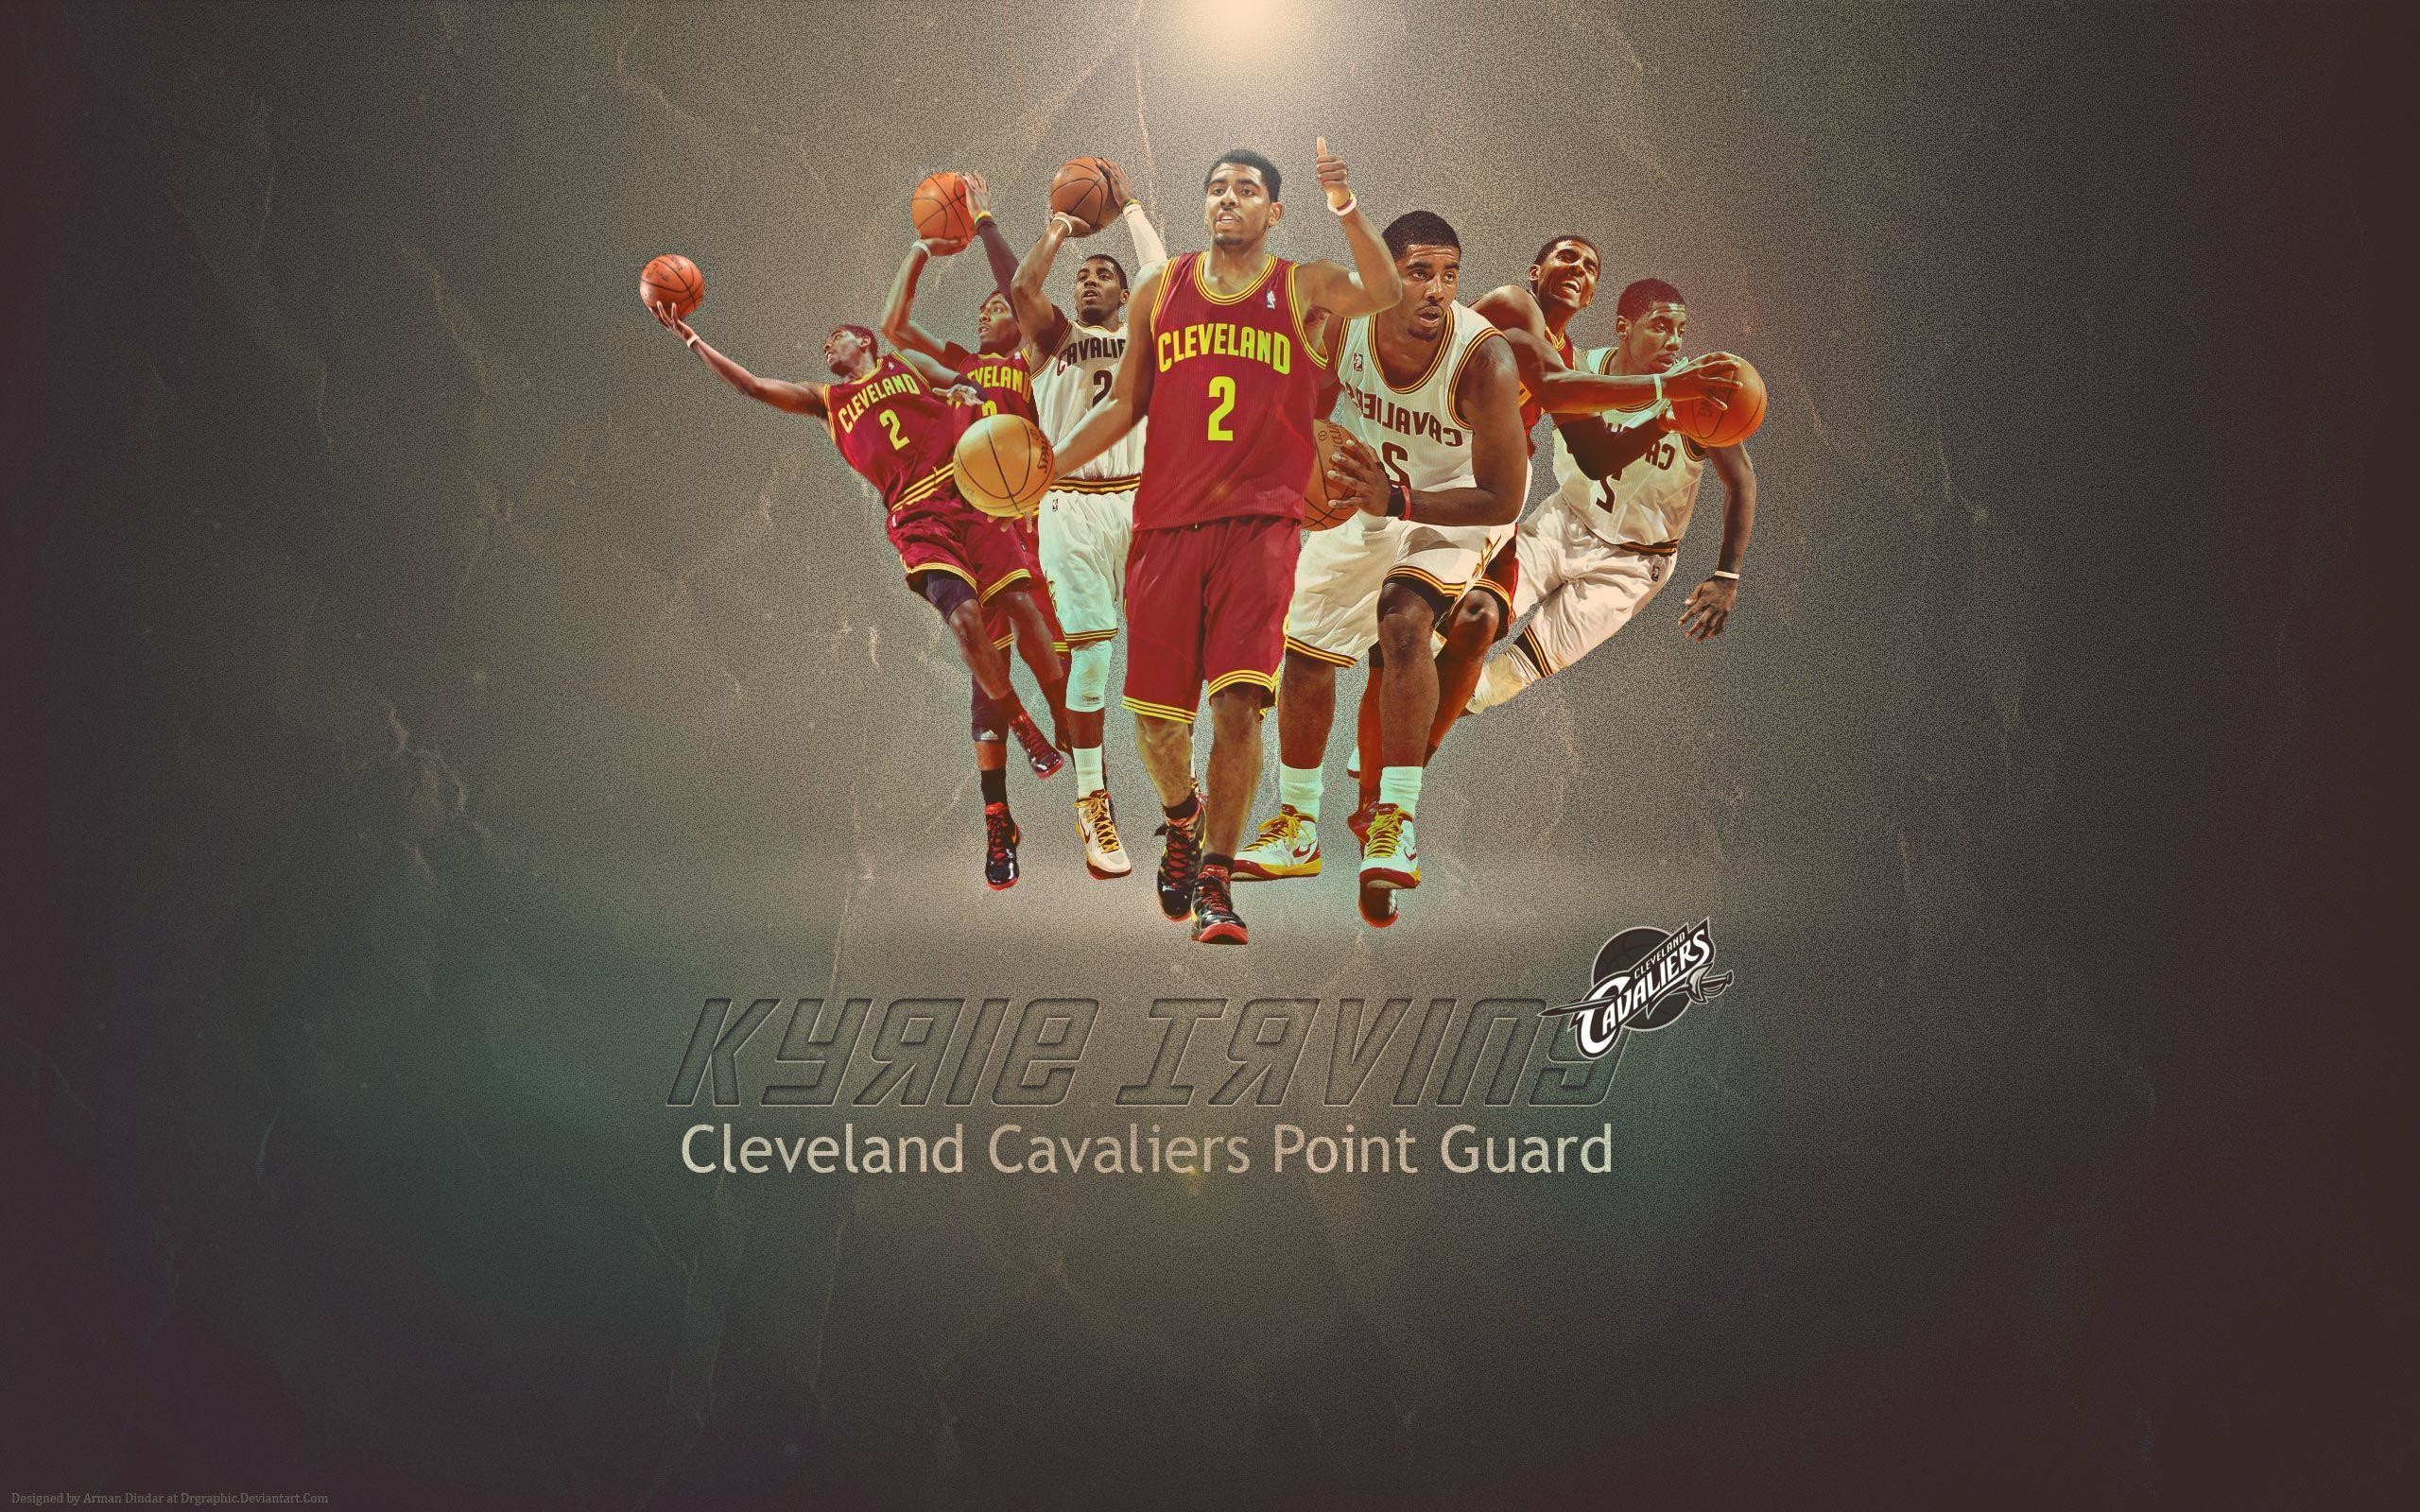 2560x1600 Cleveland Cavaliers Wallpapers | Basketball Wallpapers at .